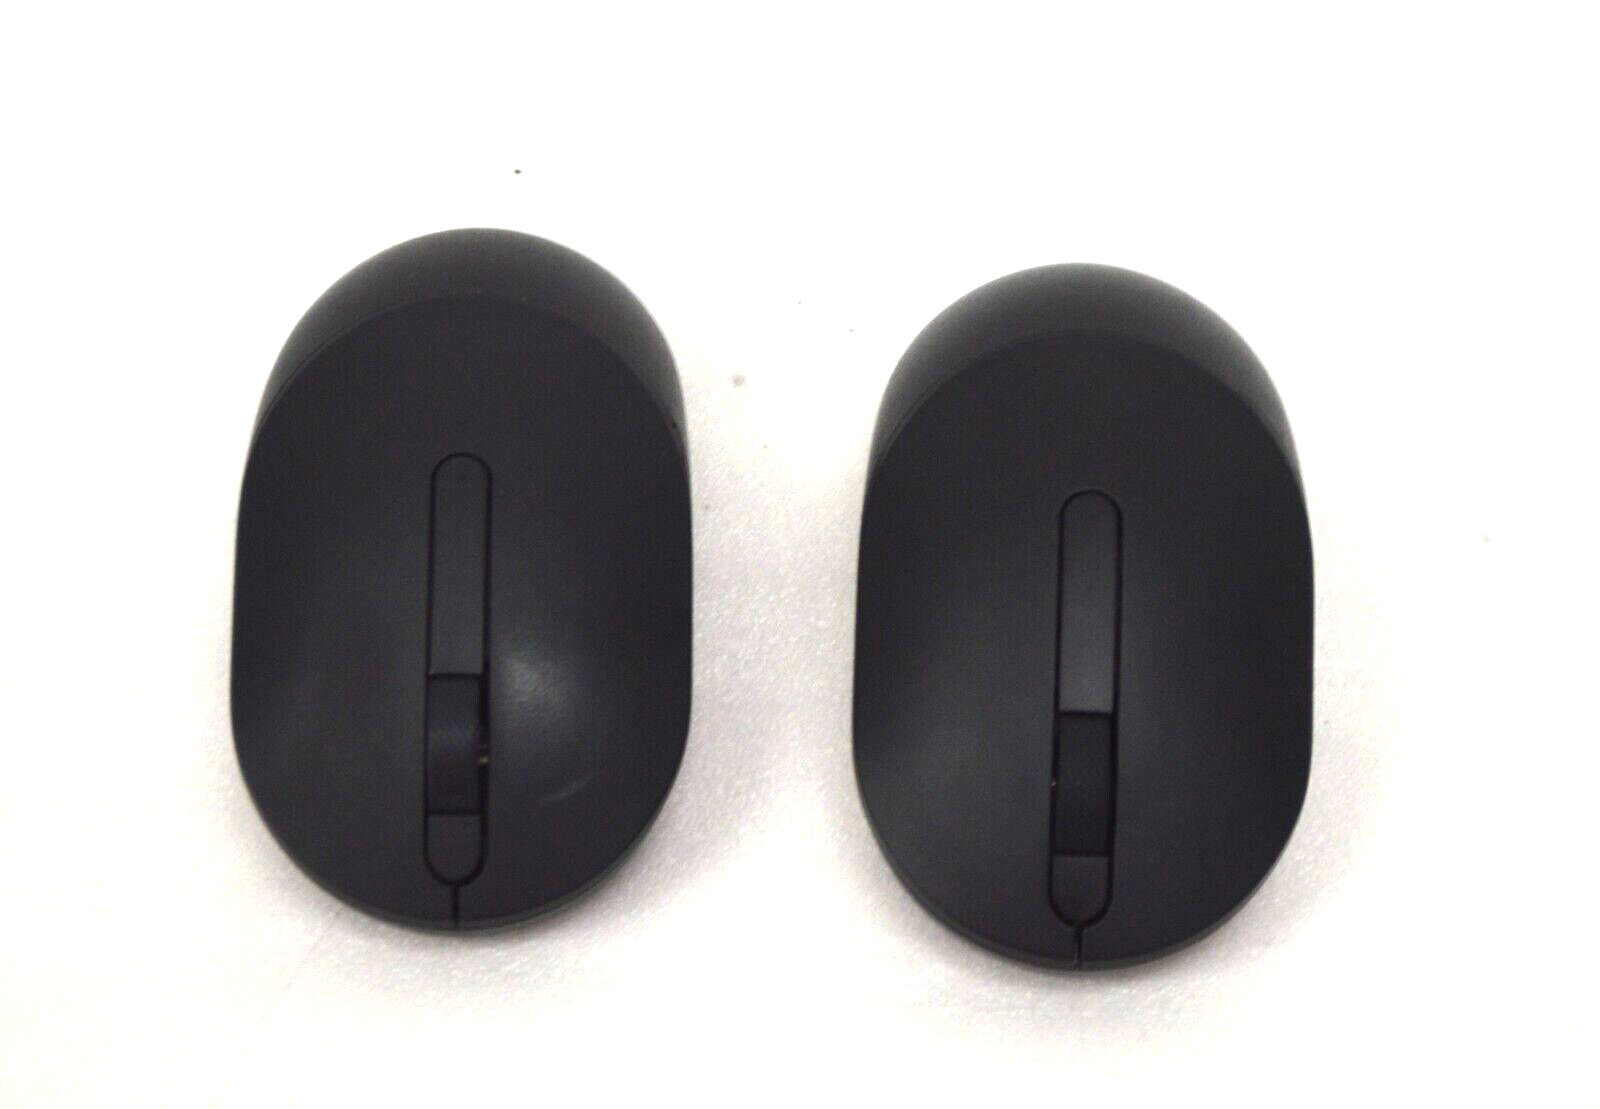 Lot of 2 Dell 0M5N9M Wireless Mouse Combo KM5221WBKB-US Black No Receiver - $30.81